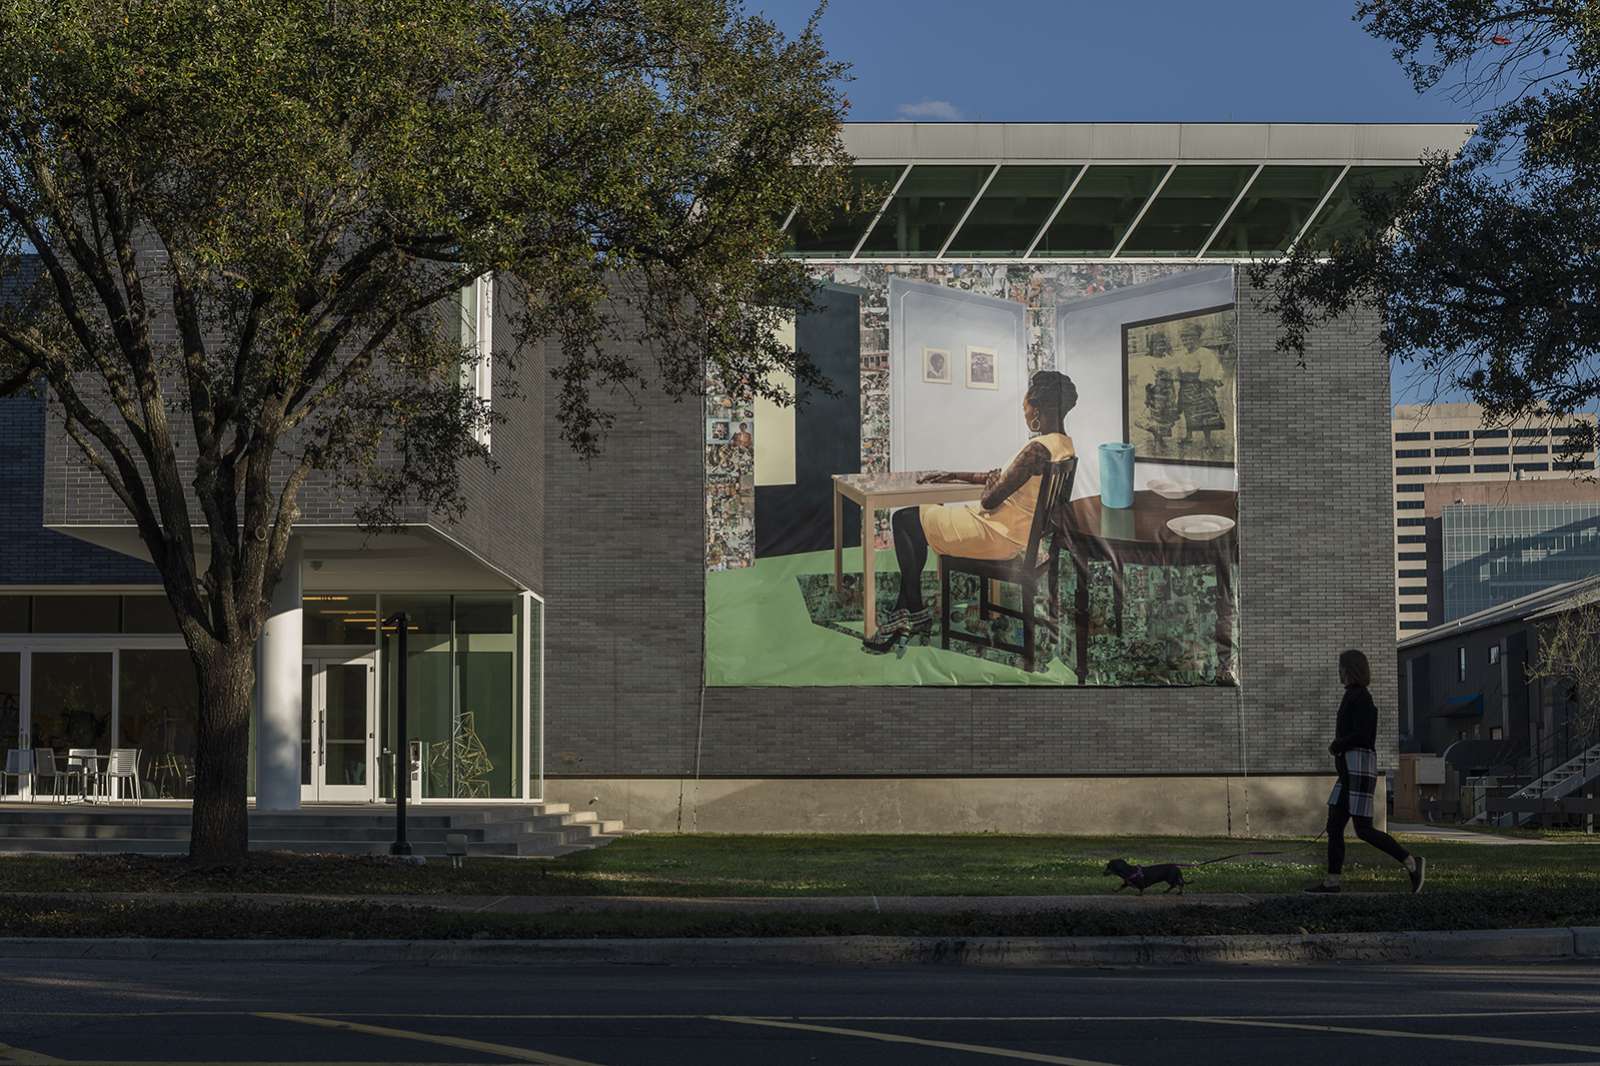 Njideka Akunyili Crosby, In the Lavender Room, 2019. Banner created from original artwork. Moody Center for the Arts. Photo by Nash Baker.